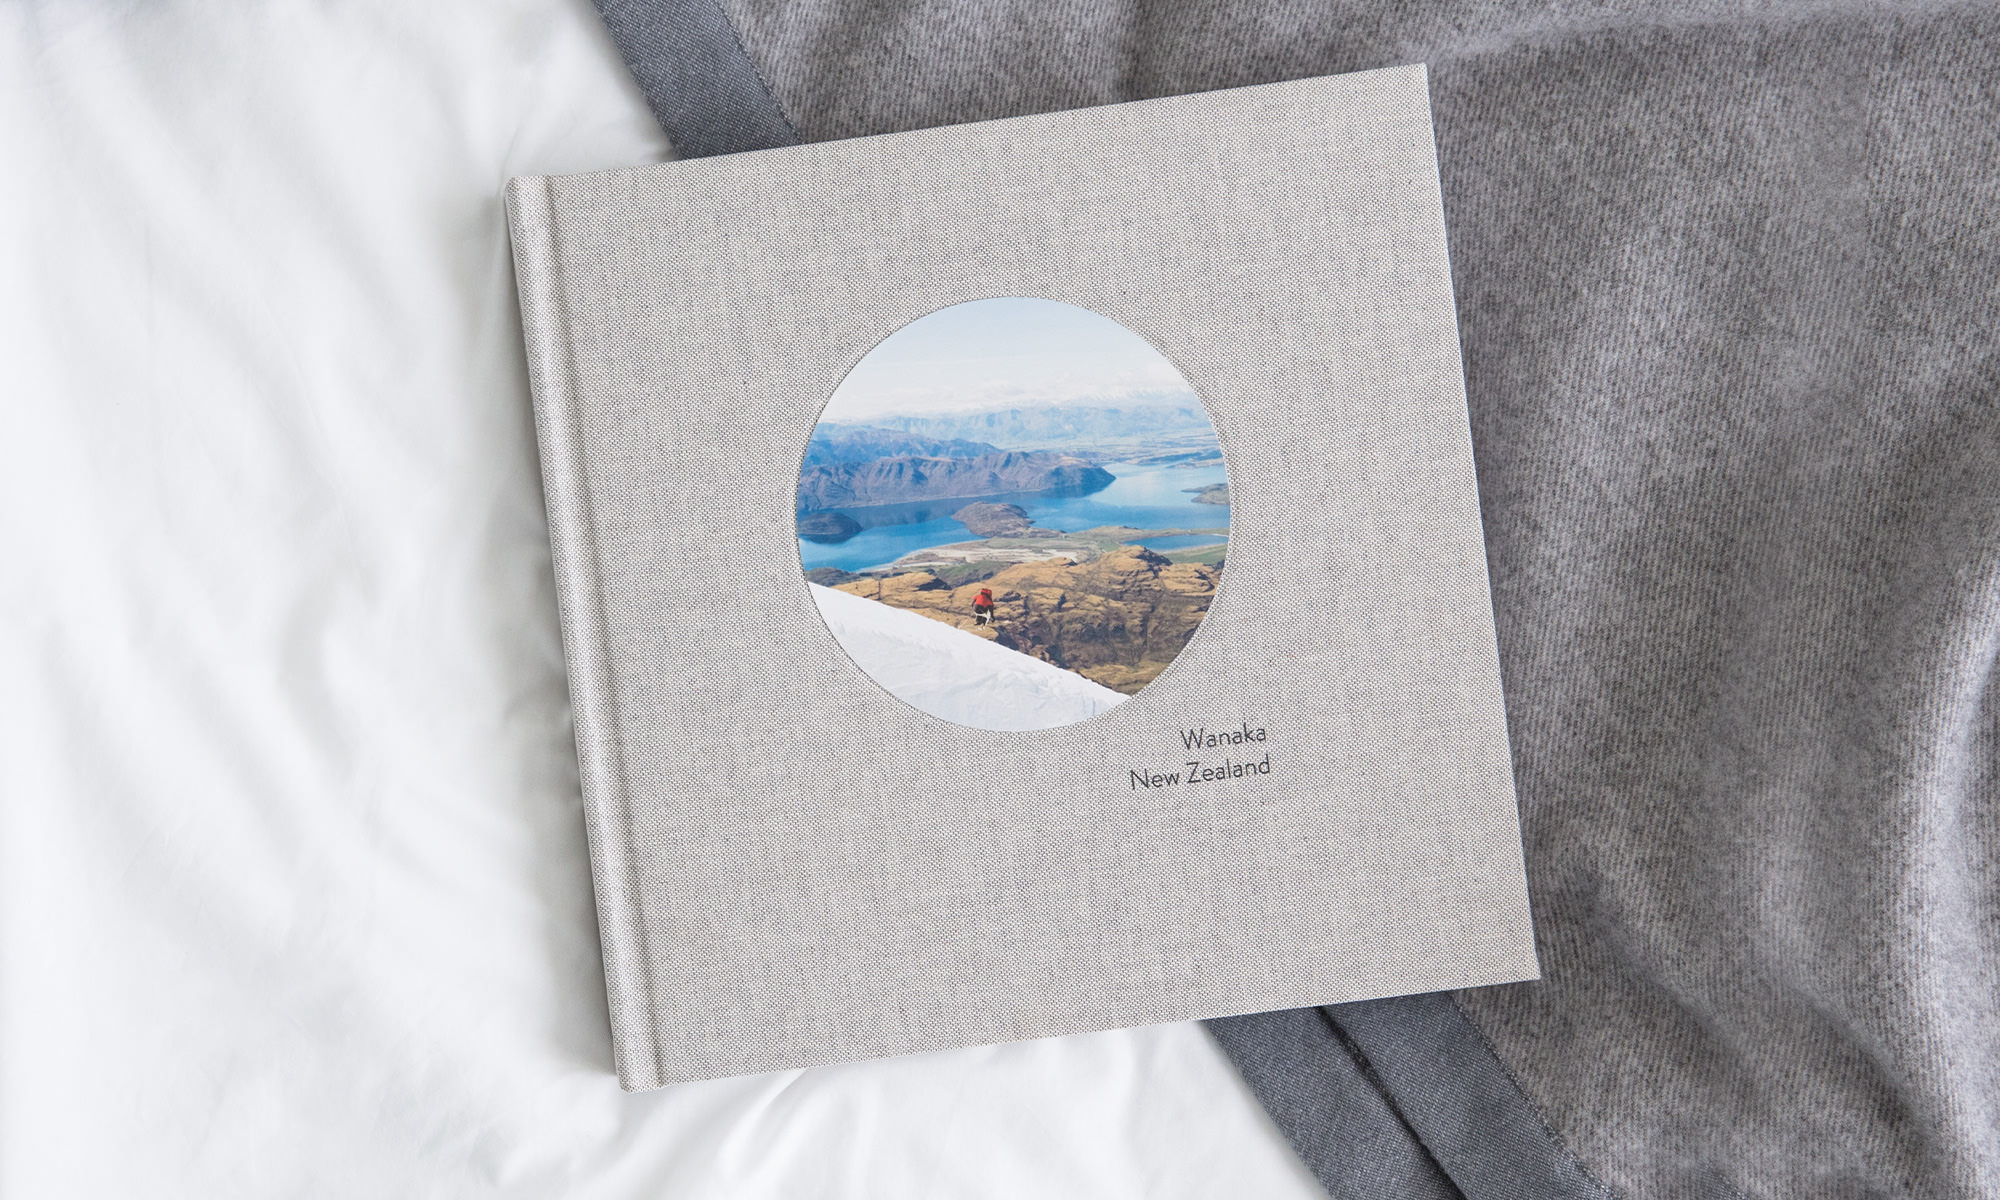 Large square photo book with an image of Wanaka, New Zealand on the cover.